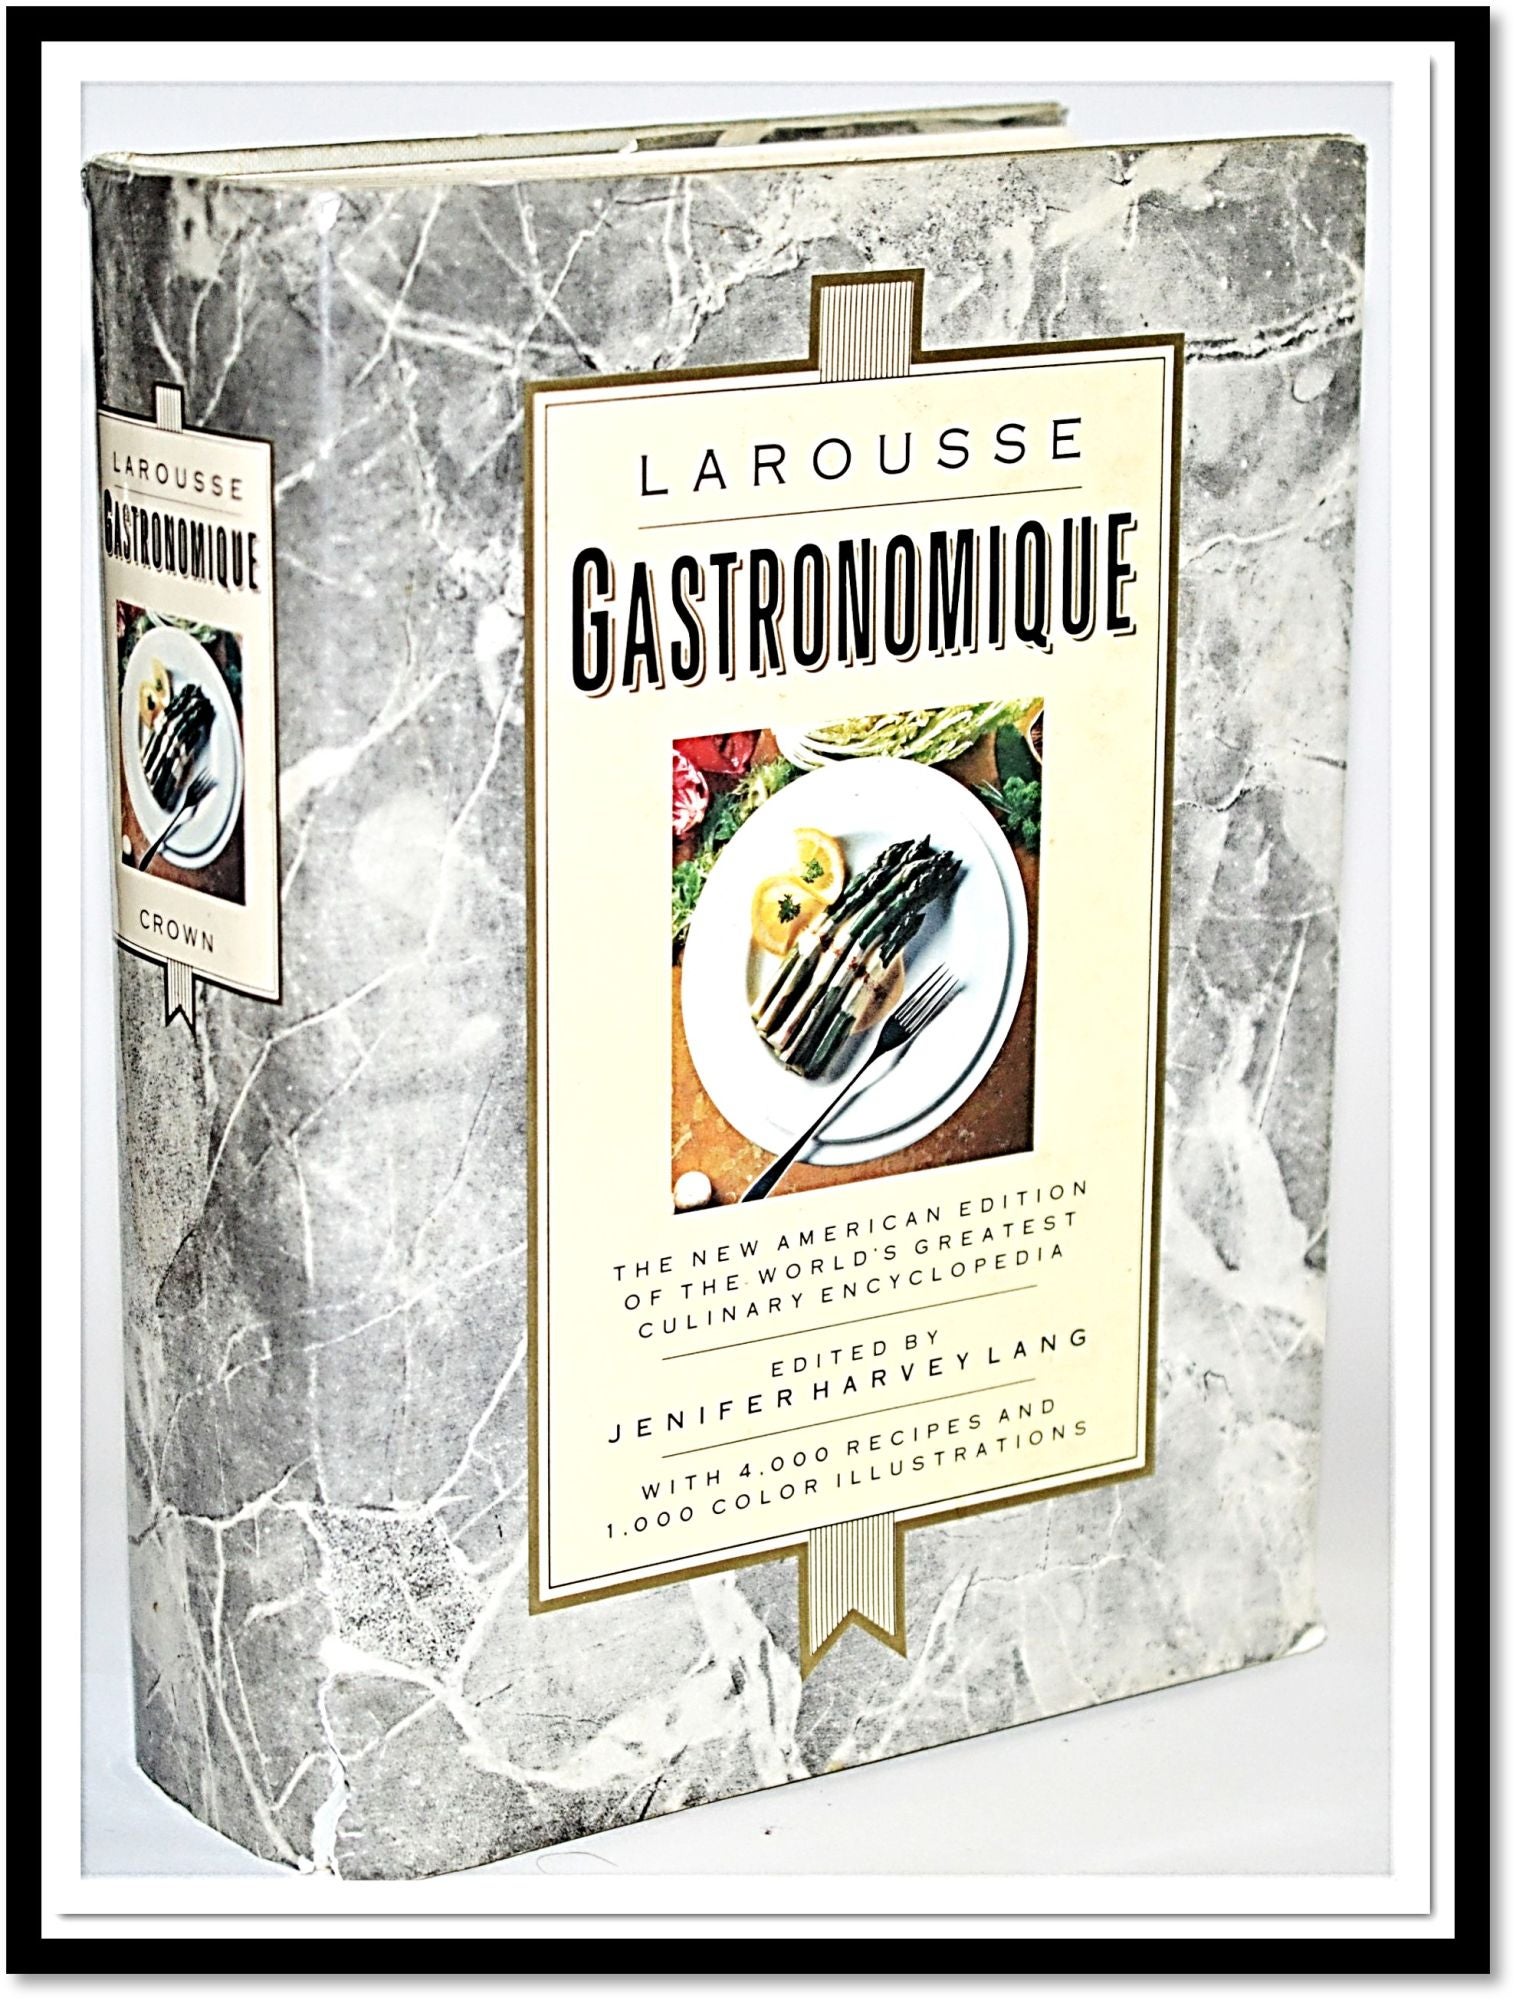 Larousse Gastronomique: The New American Edition of the World's Greatest  Culinary Encyclopedia by Prosper Montagnae, Jenifer Harvey Lang on Blind